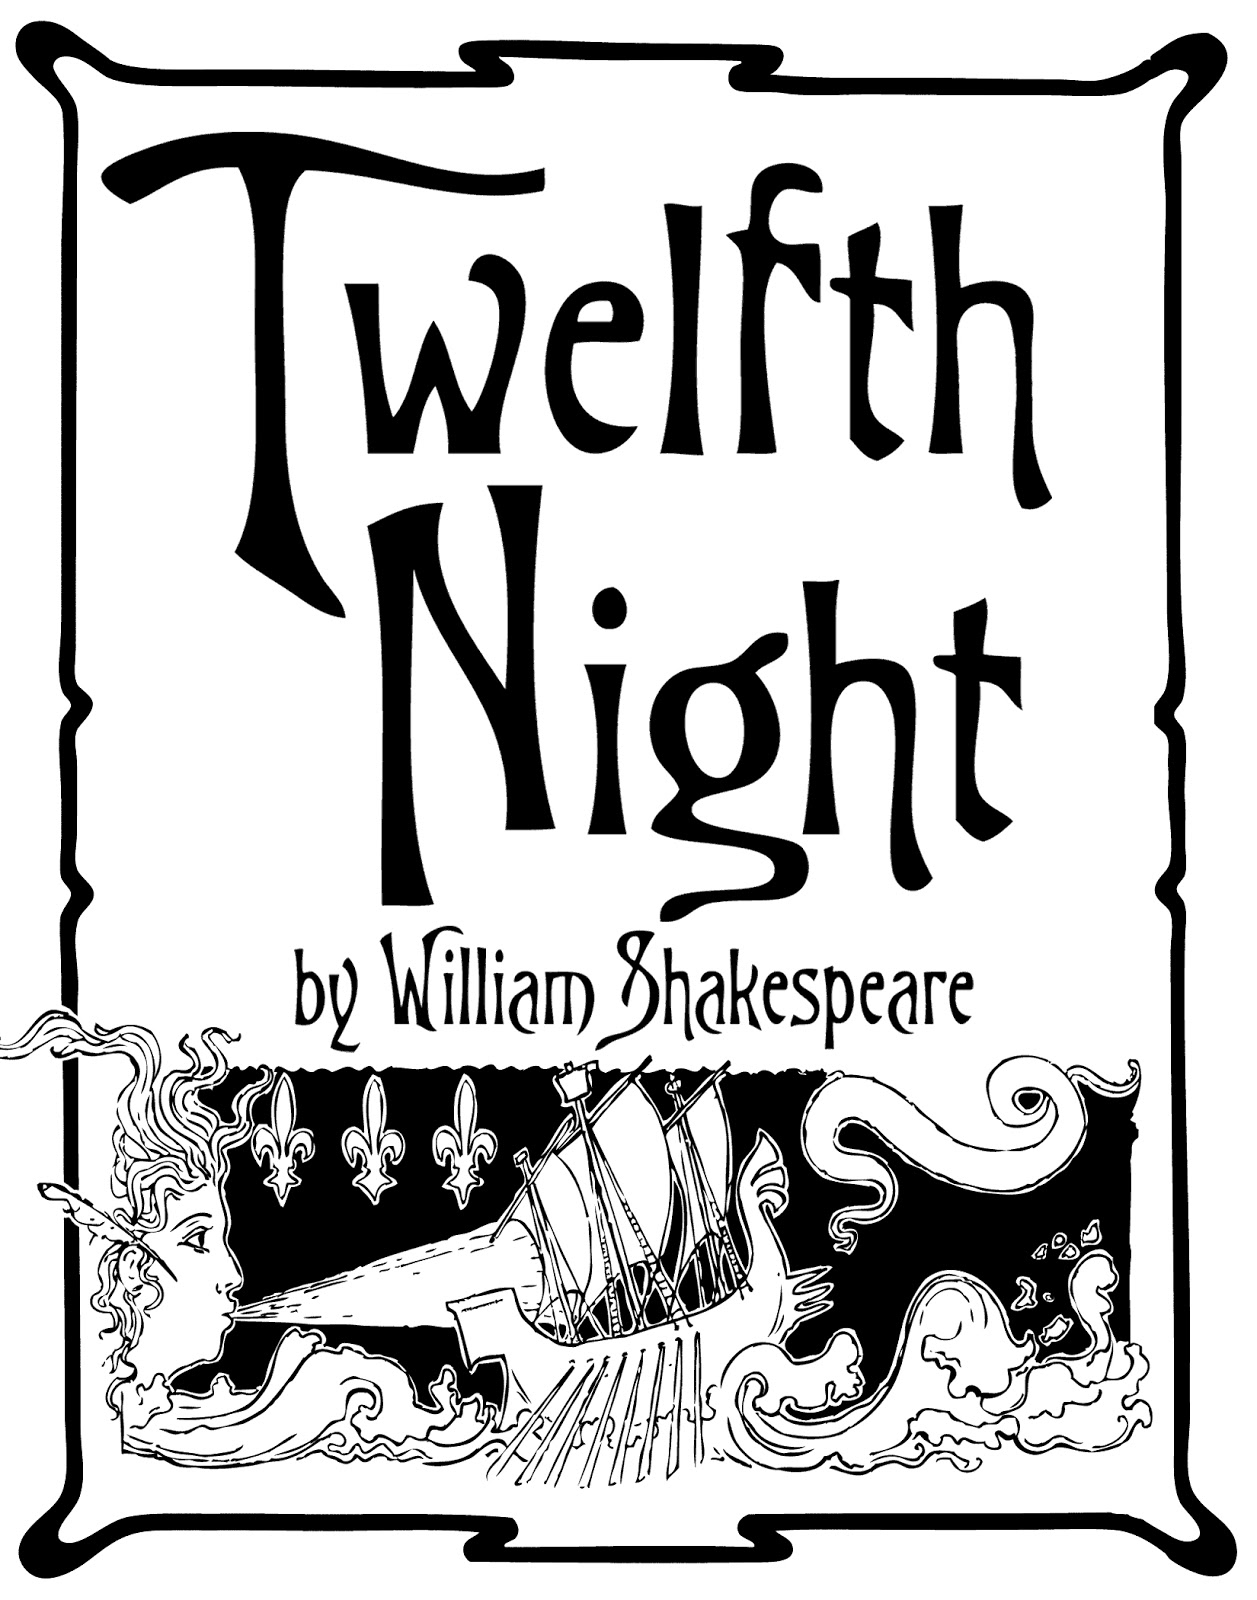 The relationships and love in twelfth night by william shakespeare